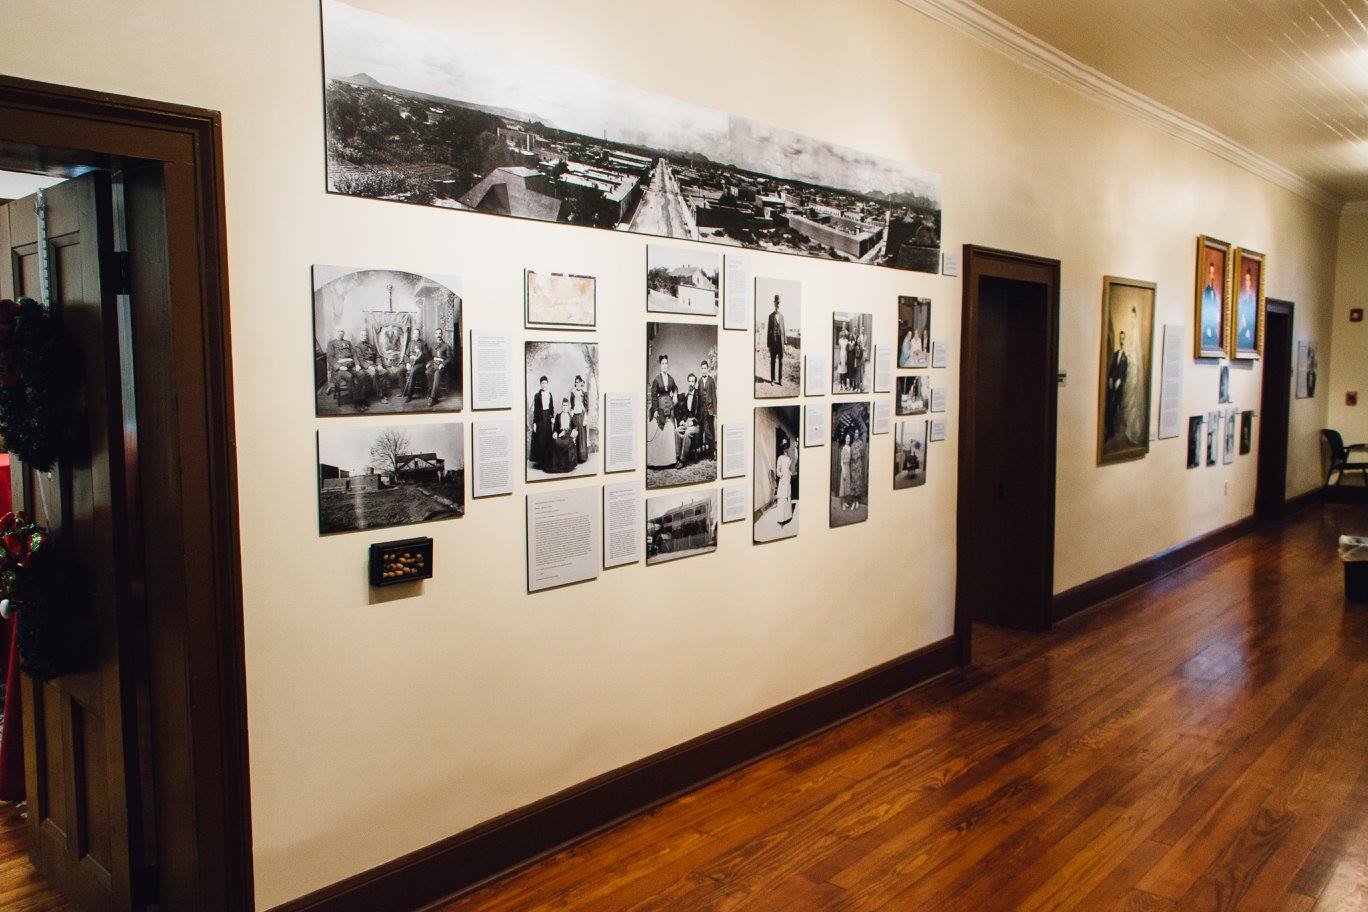 A wall of photos in the Armijo House honors Don Nestor Armijo and his family.